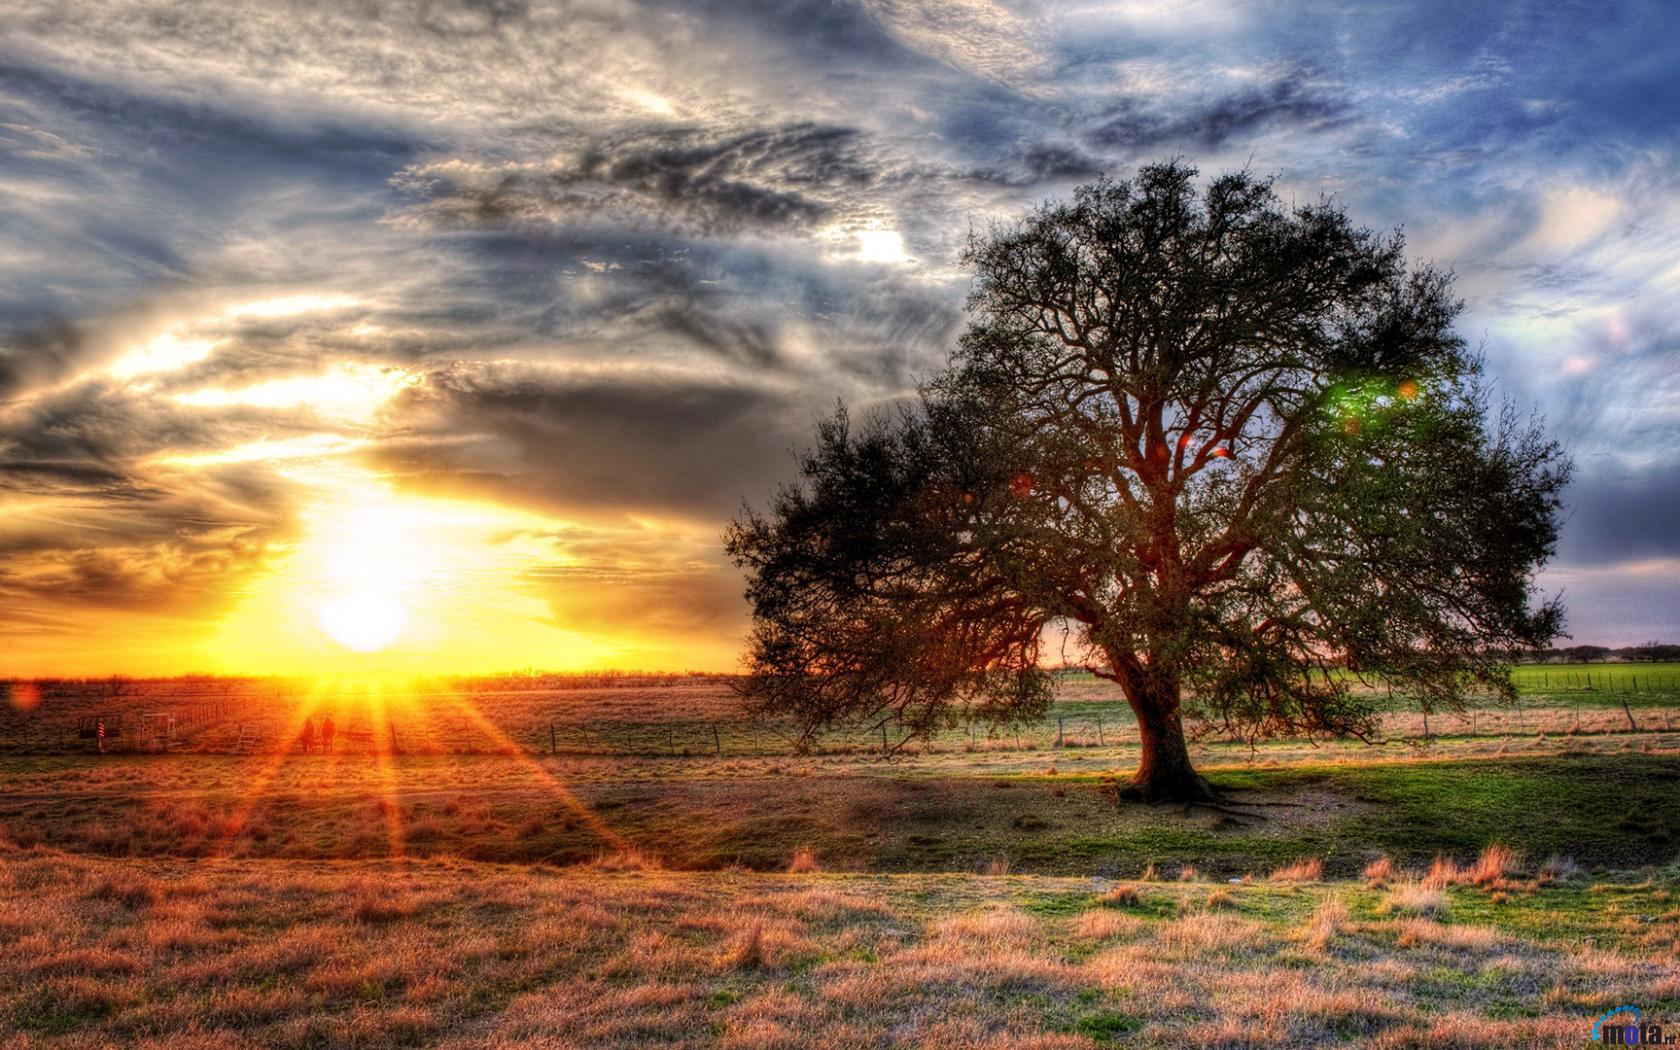 Download Wallpaper HDR Sunset on a Texas Farm 1680 x 1050